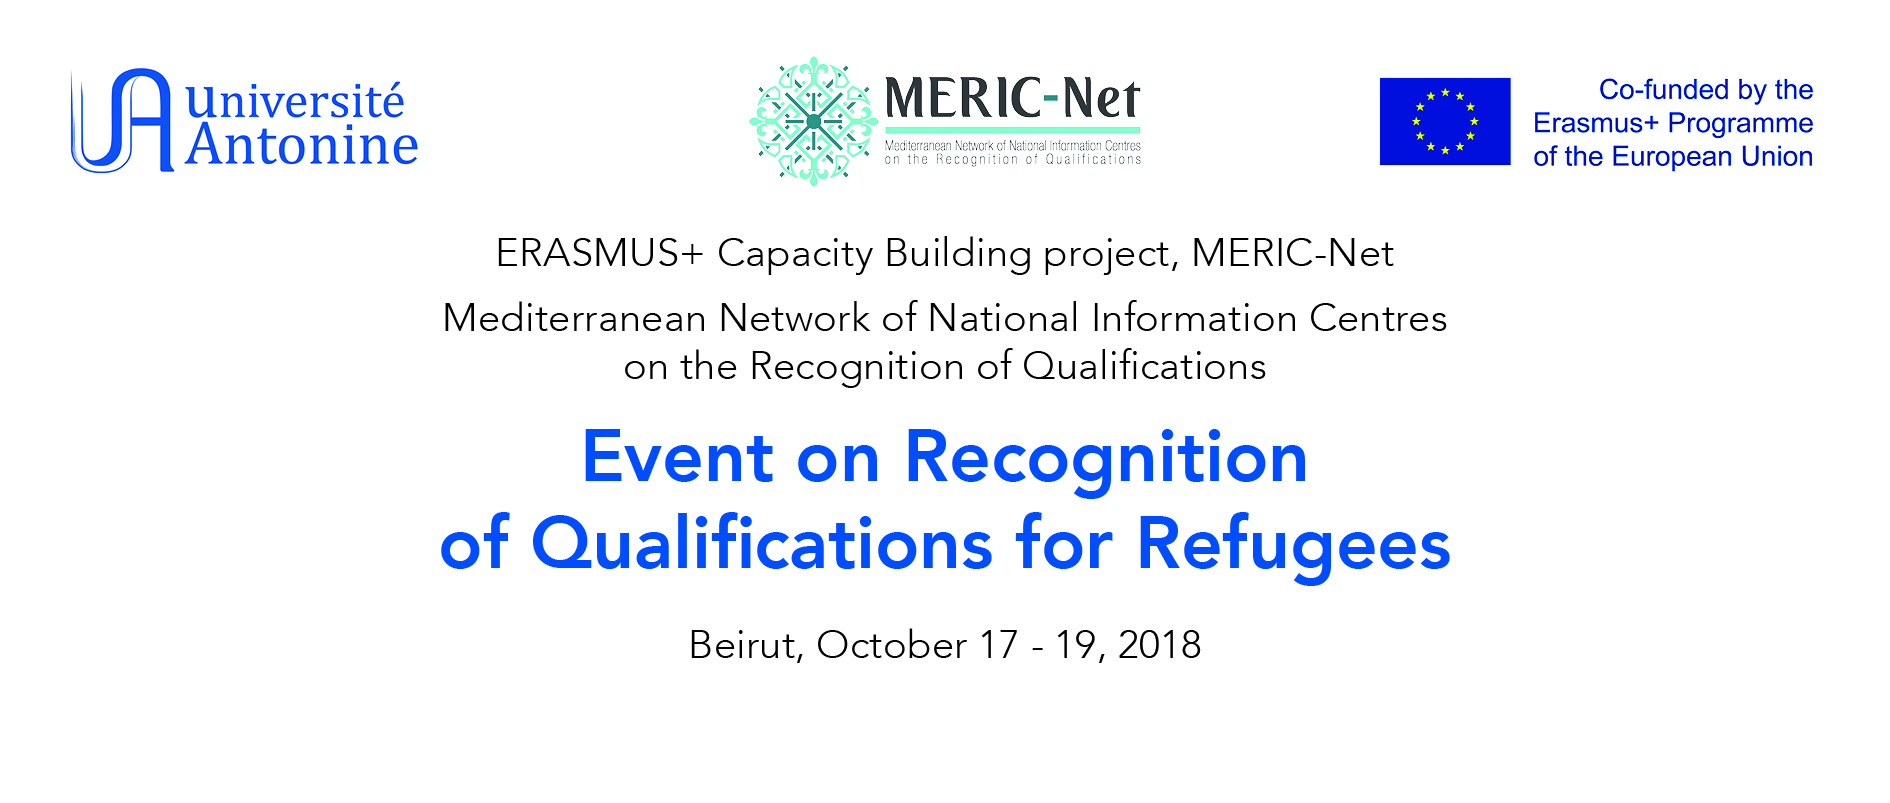 Erasmus+, MERIC-Net | Event on Recognition of Qualifications for Refugees